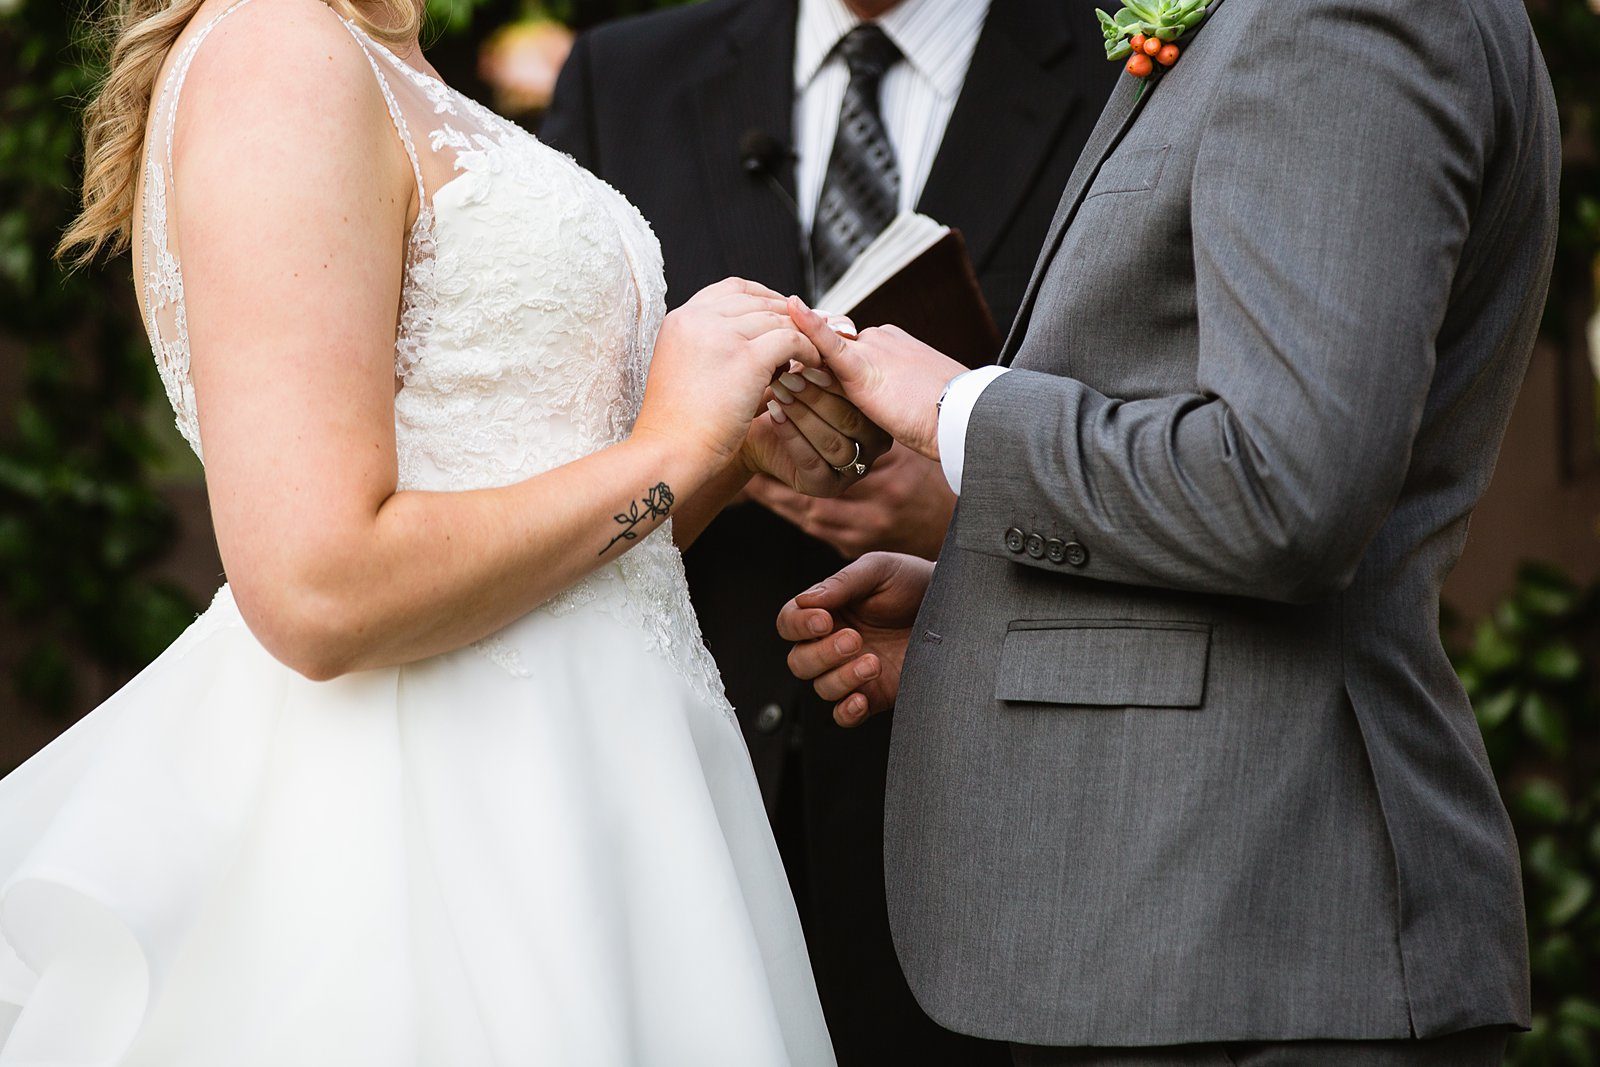 Bride and Groom exchange rings during their wedding ceremony at The Scottsdale Resort at McCormick Ranch by Arizona wedding photographer PMA Photography.